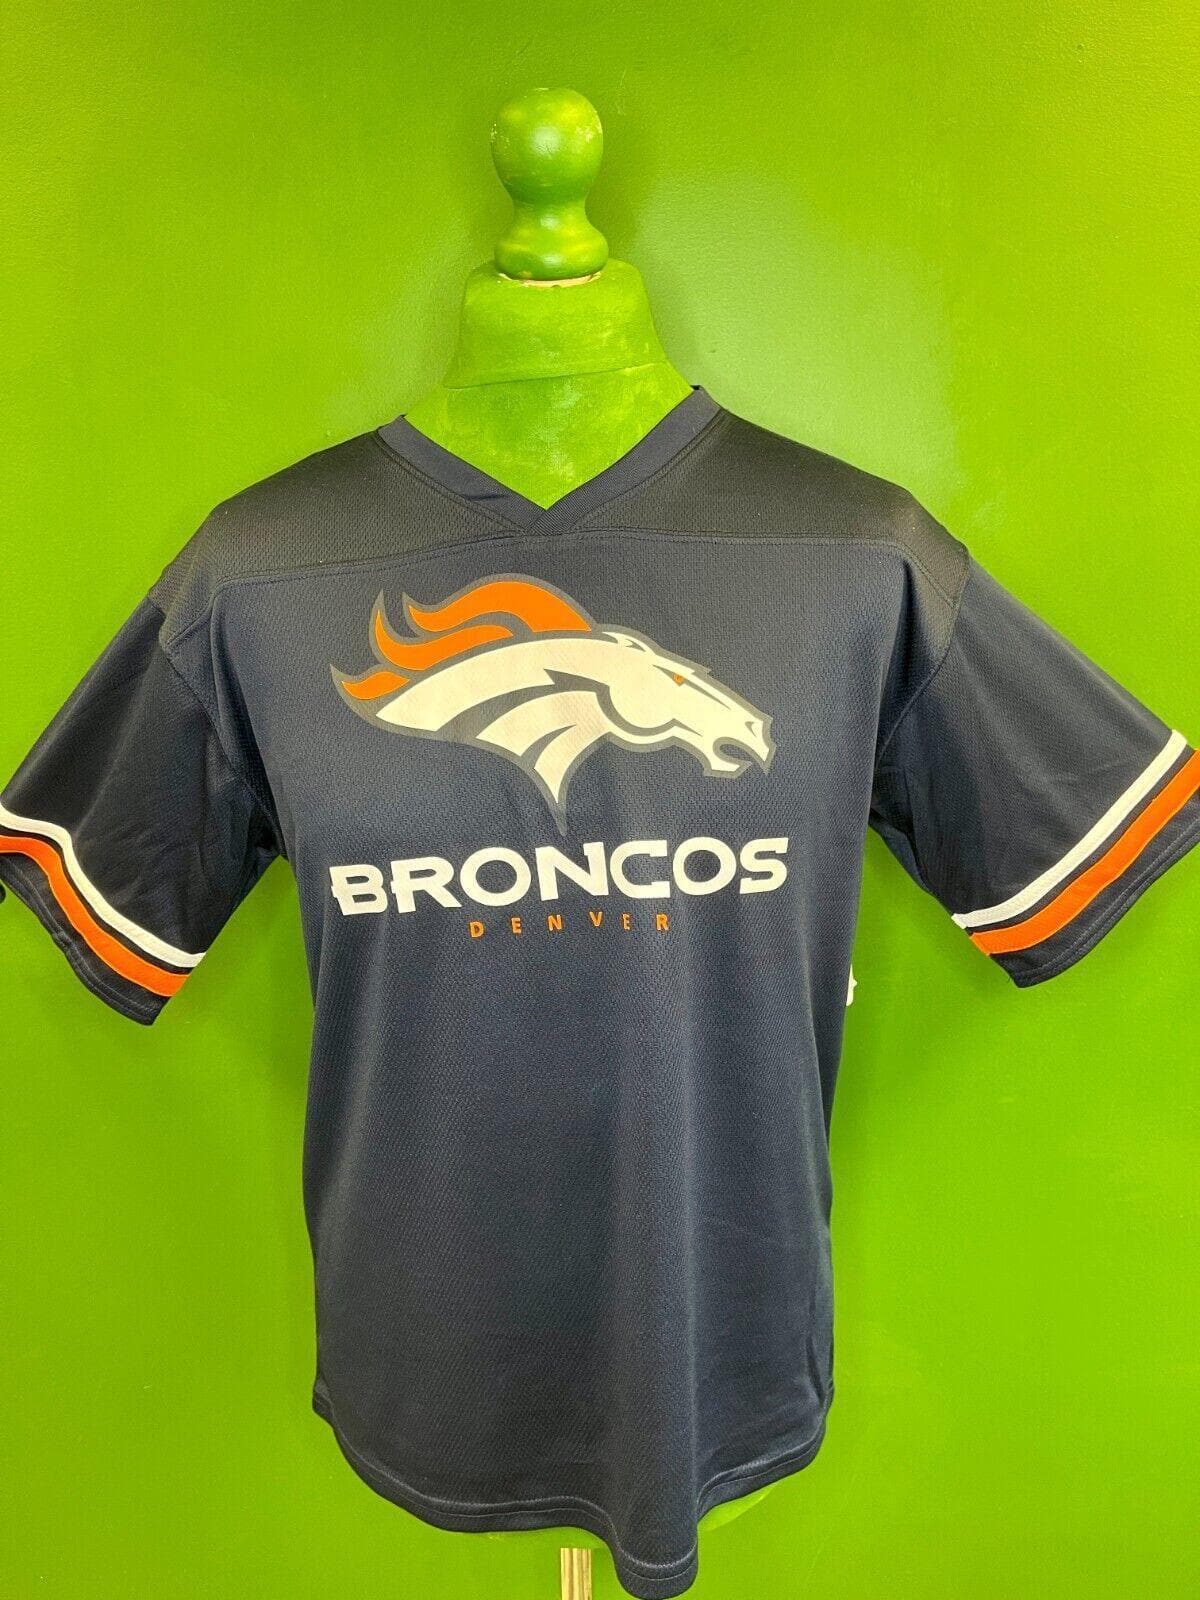 NFL Denver Broncos Jersey-Style Shirt Top Youth X-Large 18-20 NWT 42"